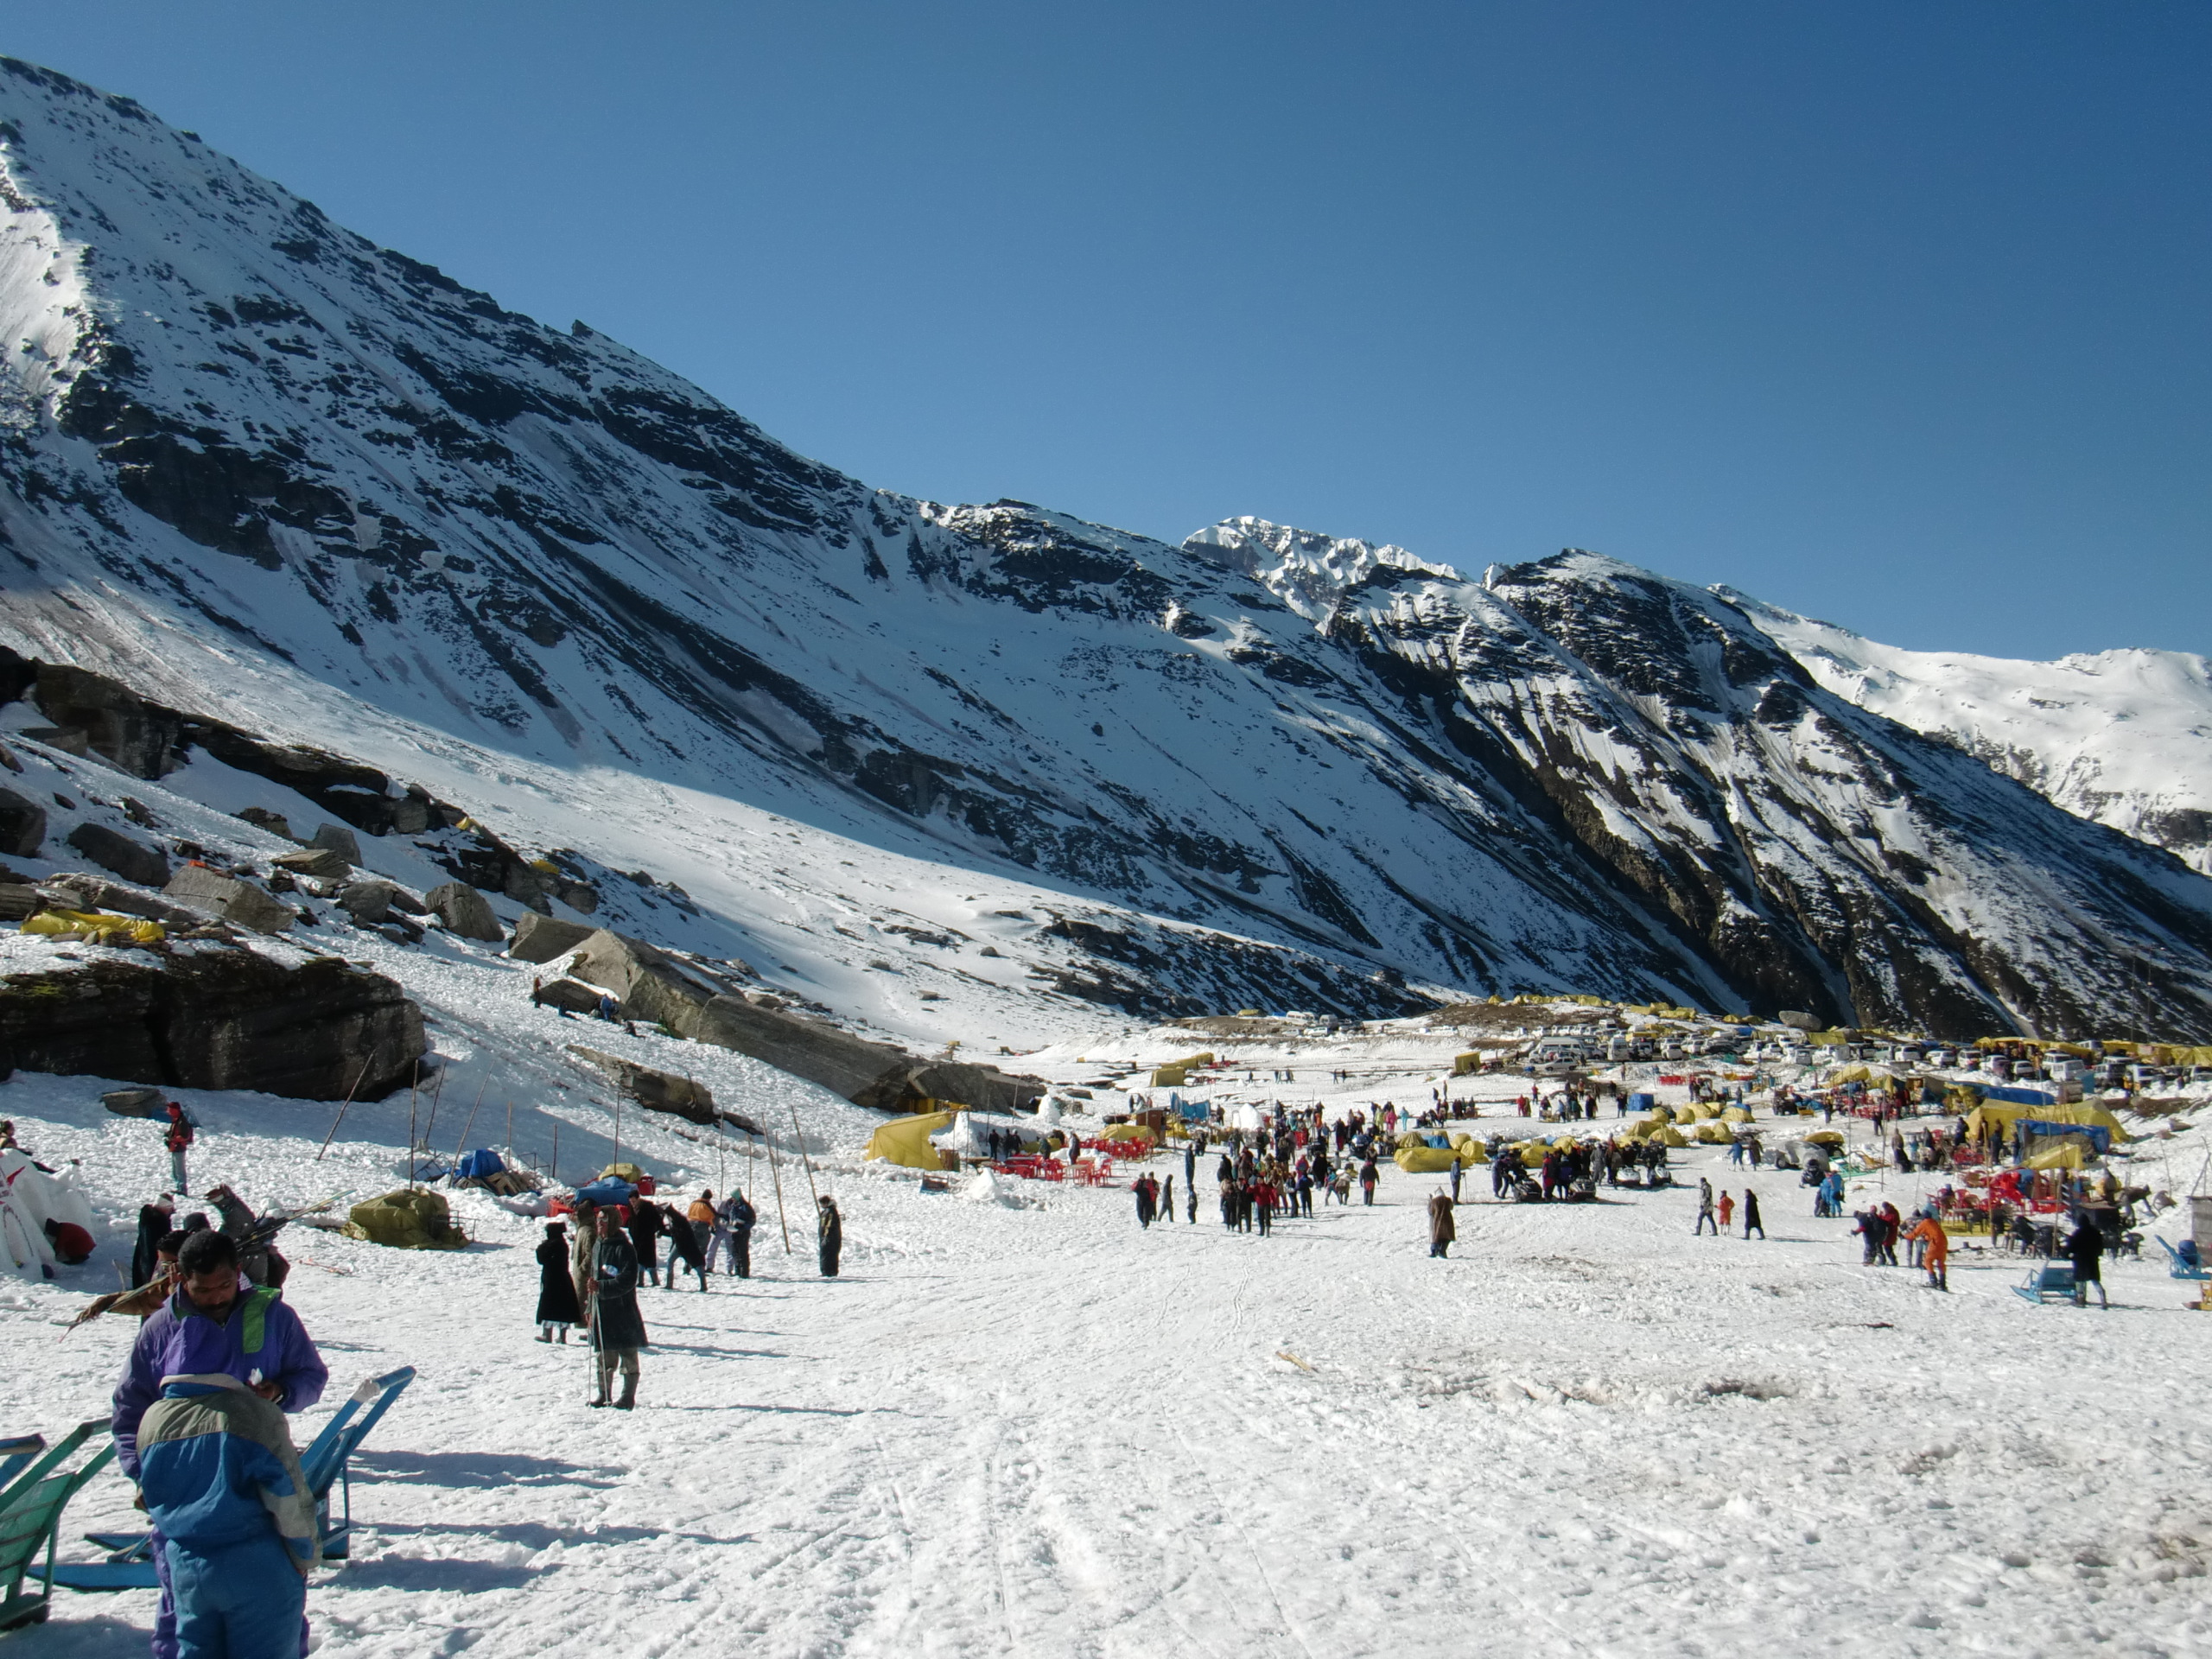 http://prasannaholidays.com/staging/wp-content/uploads/2014/05/Rohtang_pass_snowy_valley01.jpg